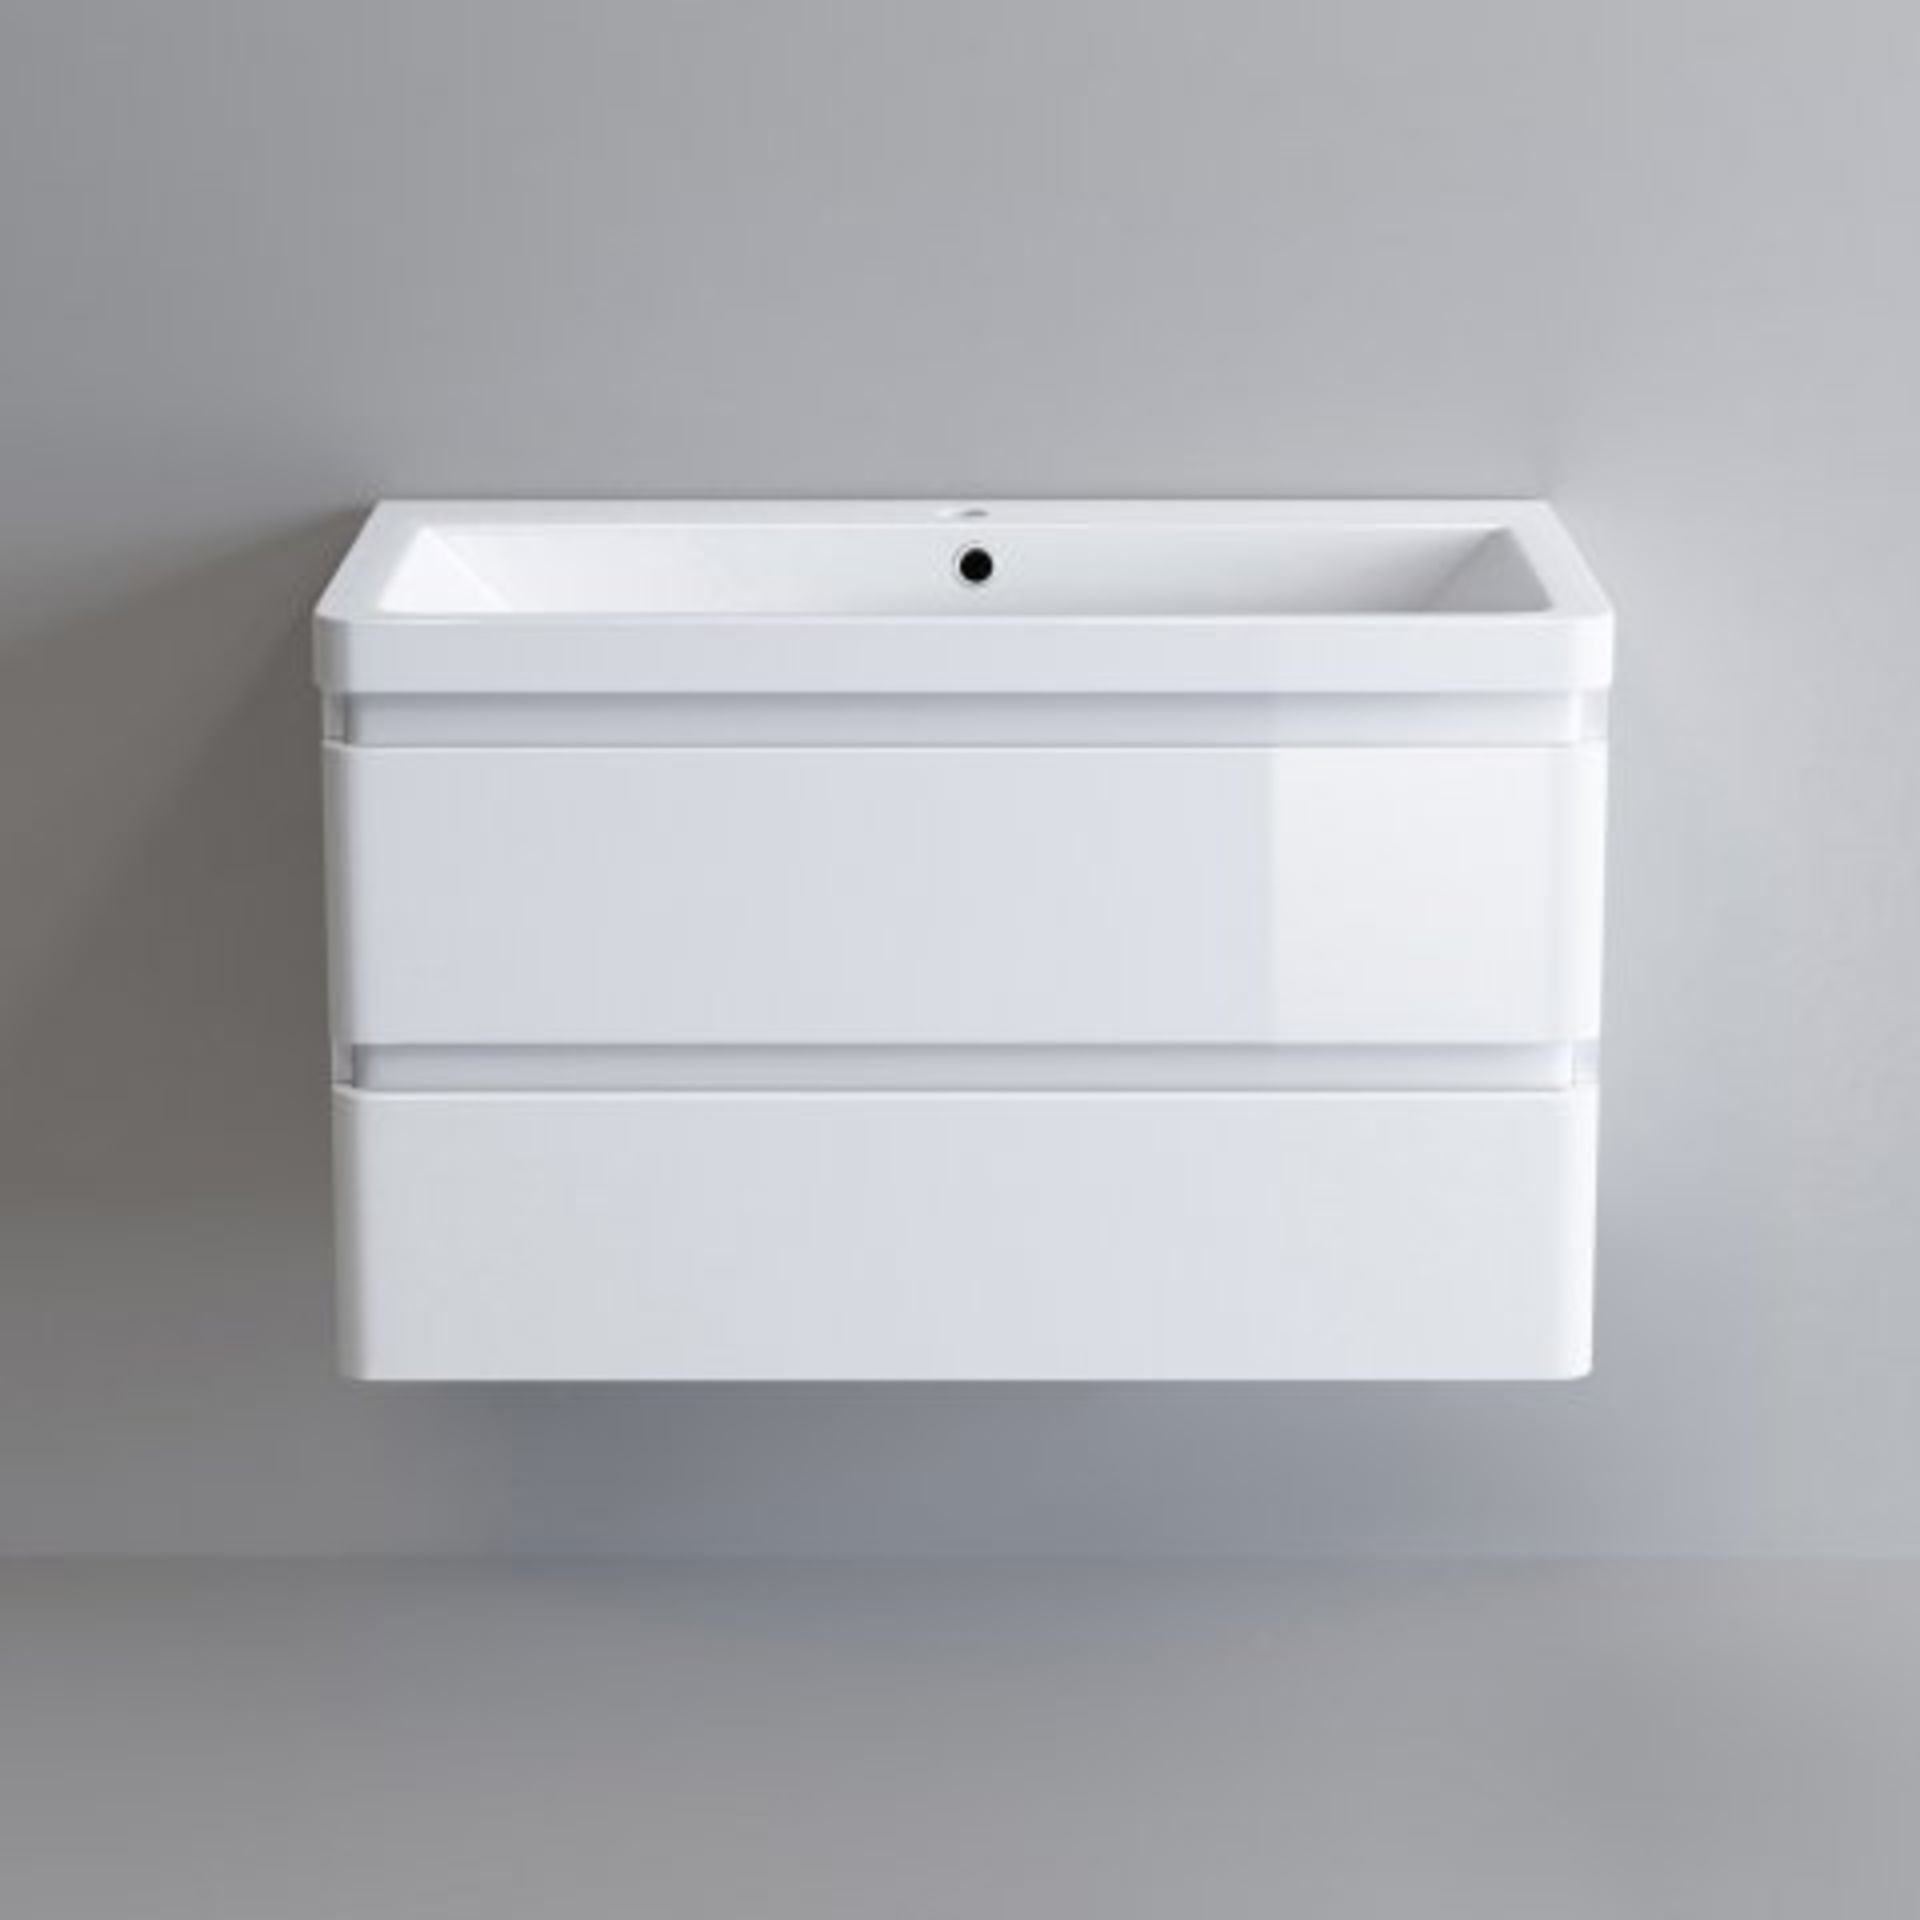 (I25) 800mm Denver II Gloss White Built In Basin Drawer Unit - Wall Hung. RRP £599.99. COMES - Image 4 of 4